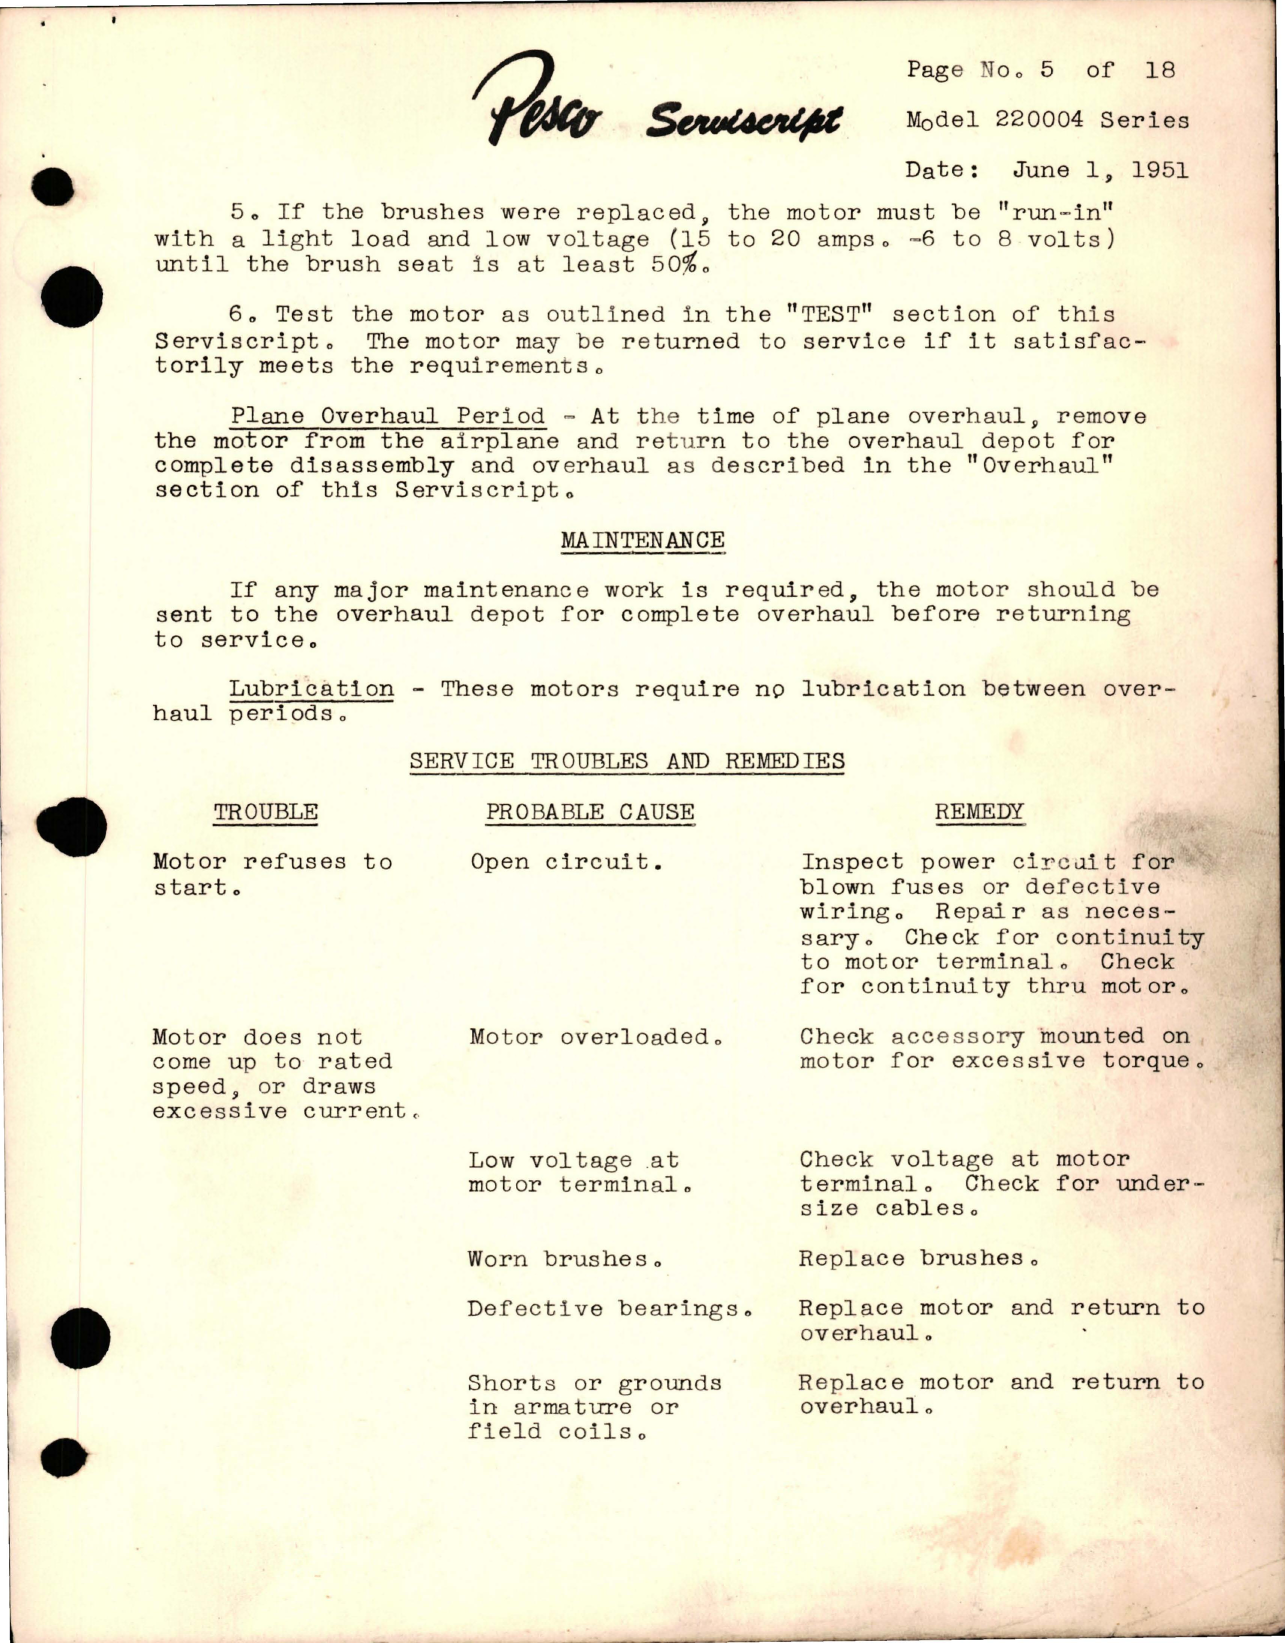 Sample page 5 from AirCorps Library document: Pesco Serviscript - Model 220004 Series Electric Motors